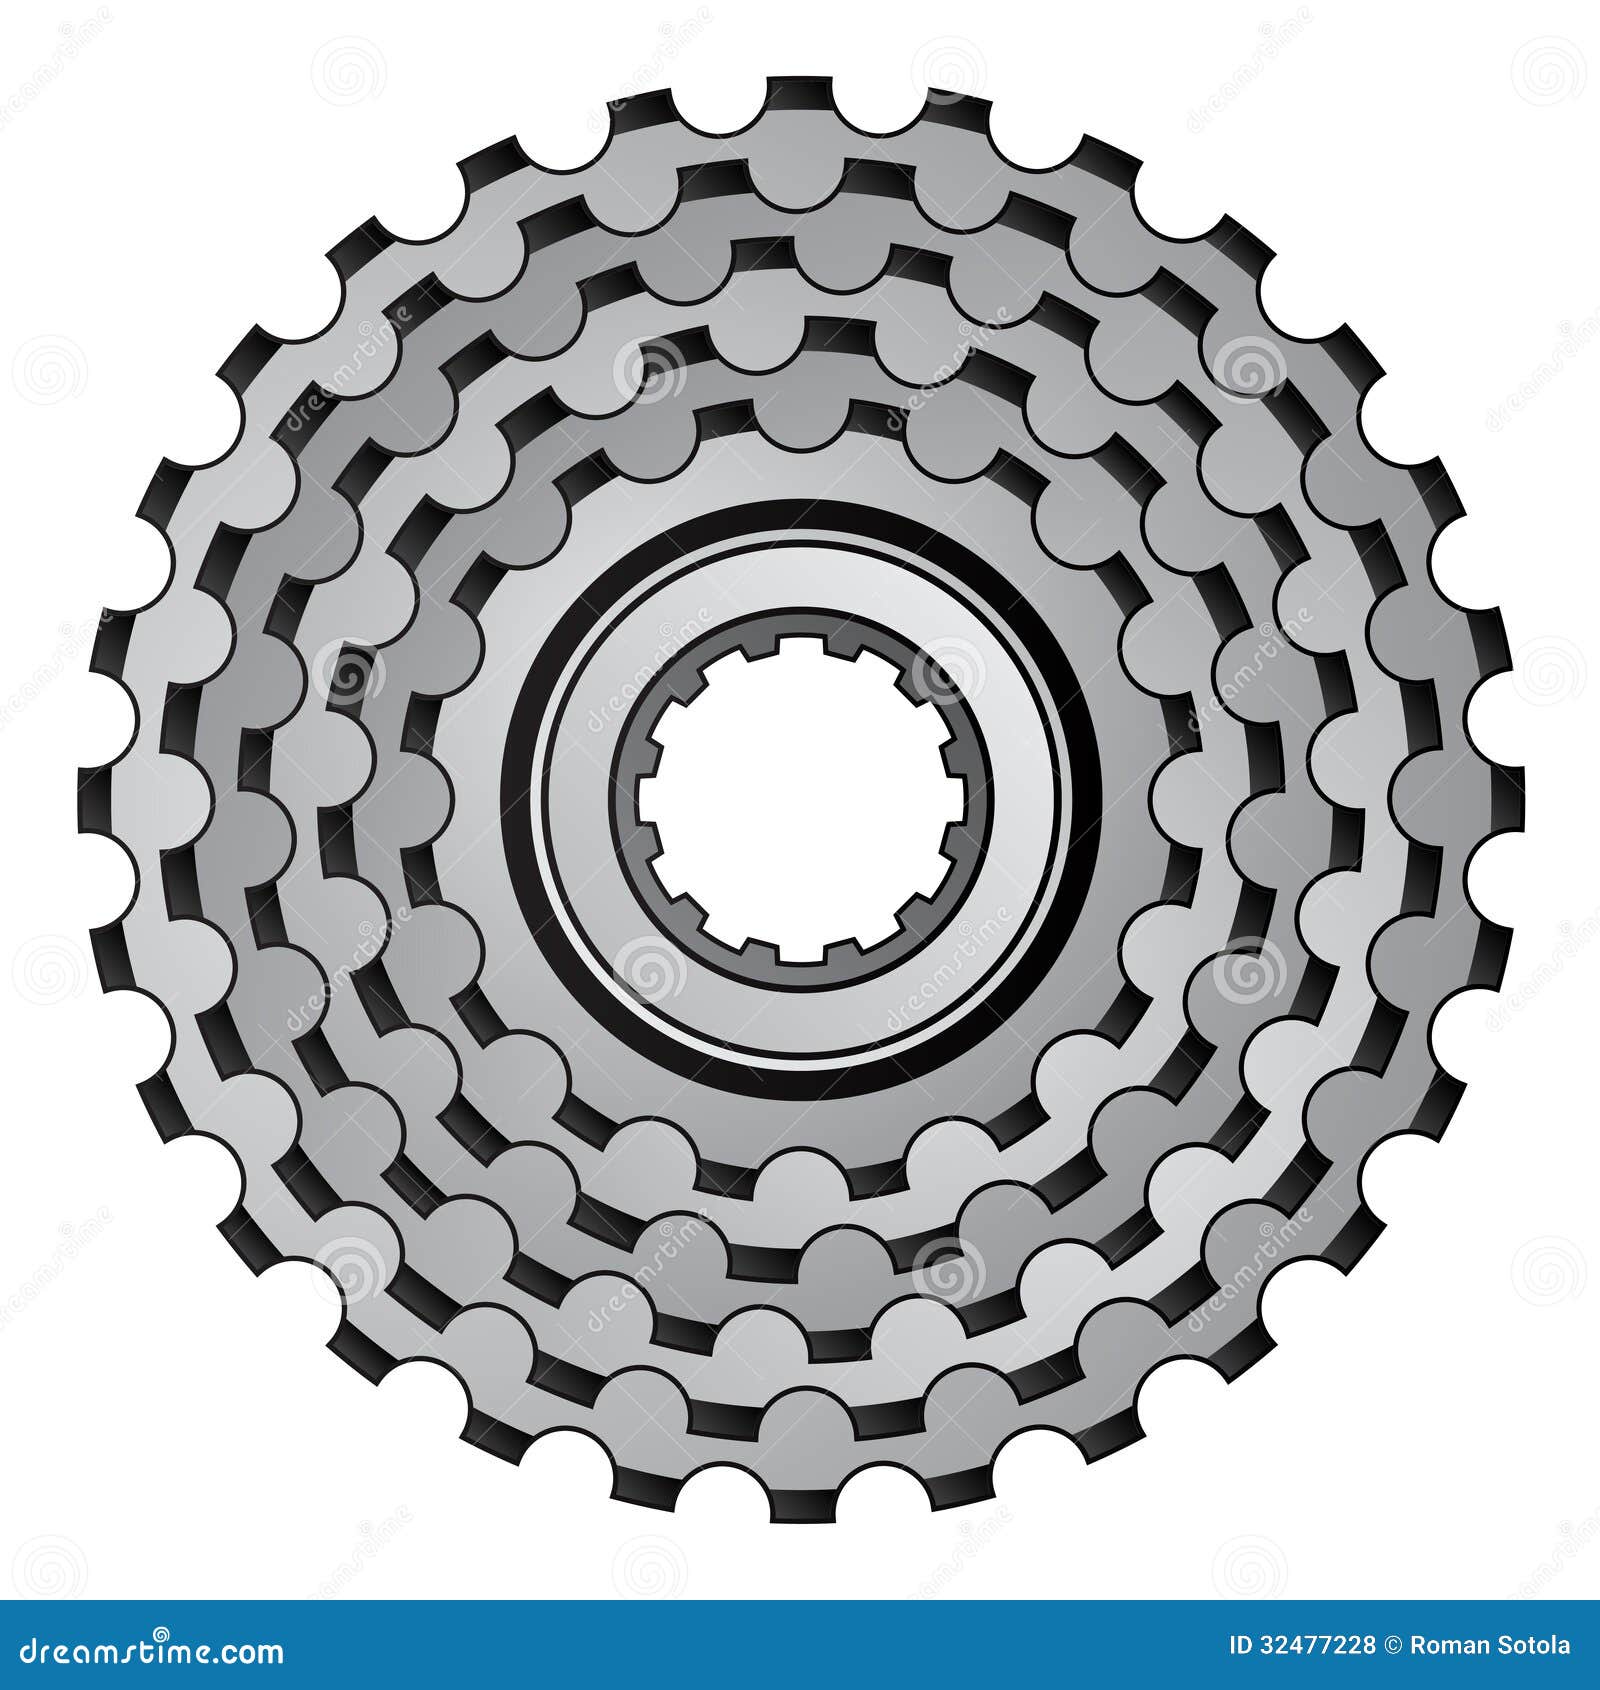 clipart bicycle gear - photo #23